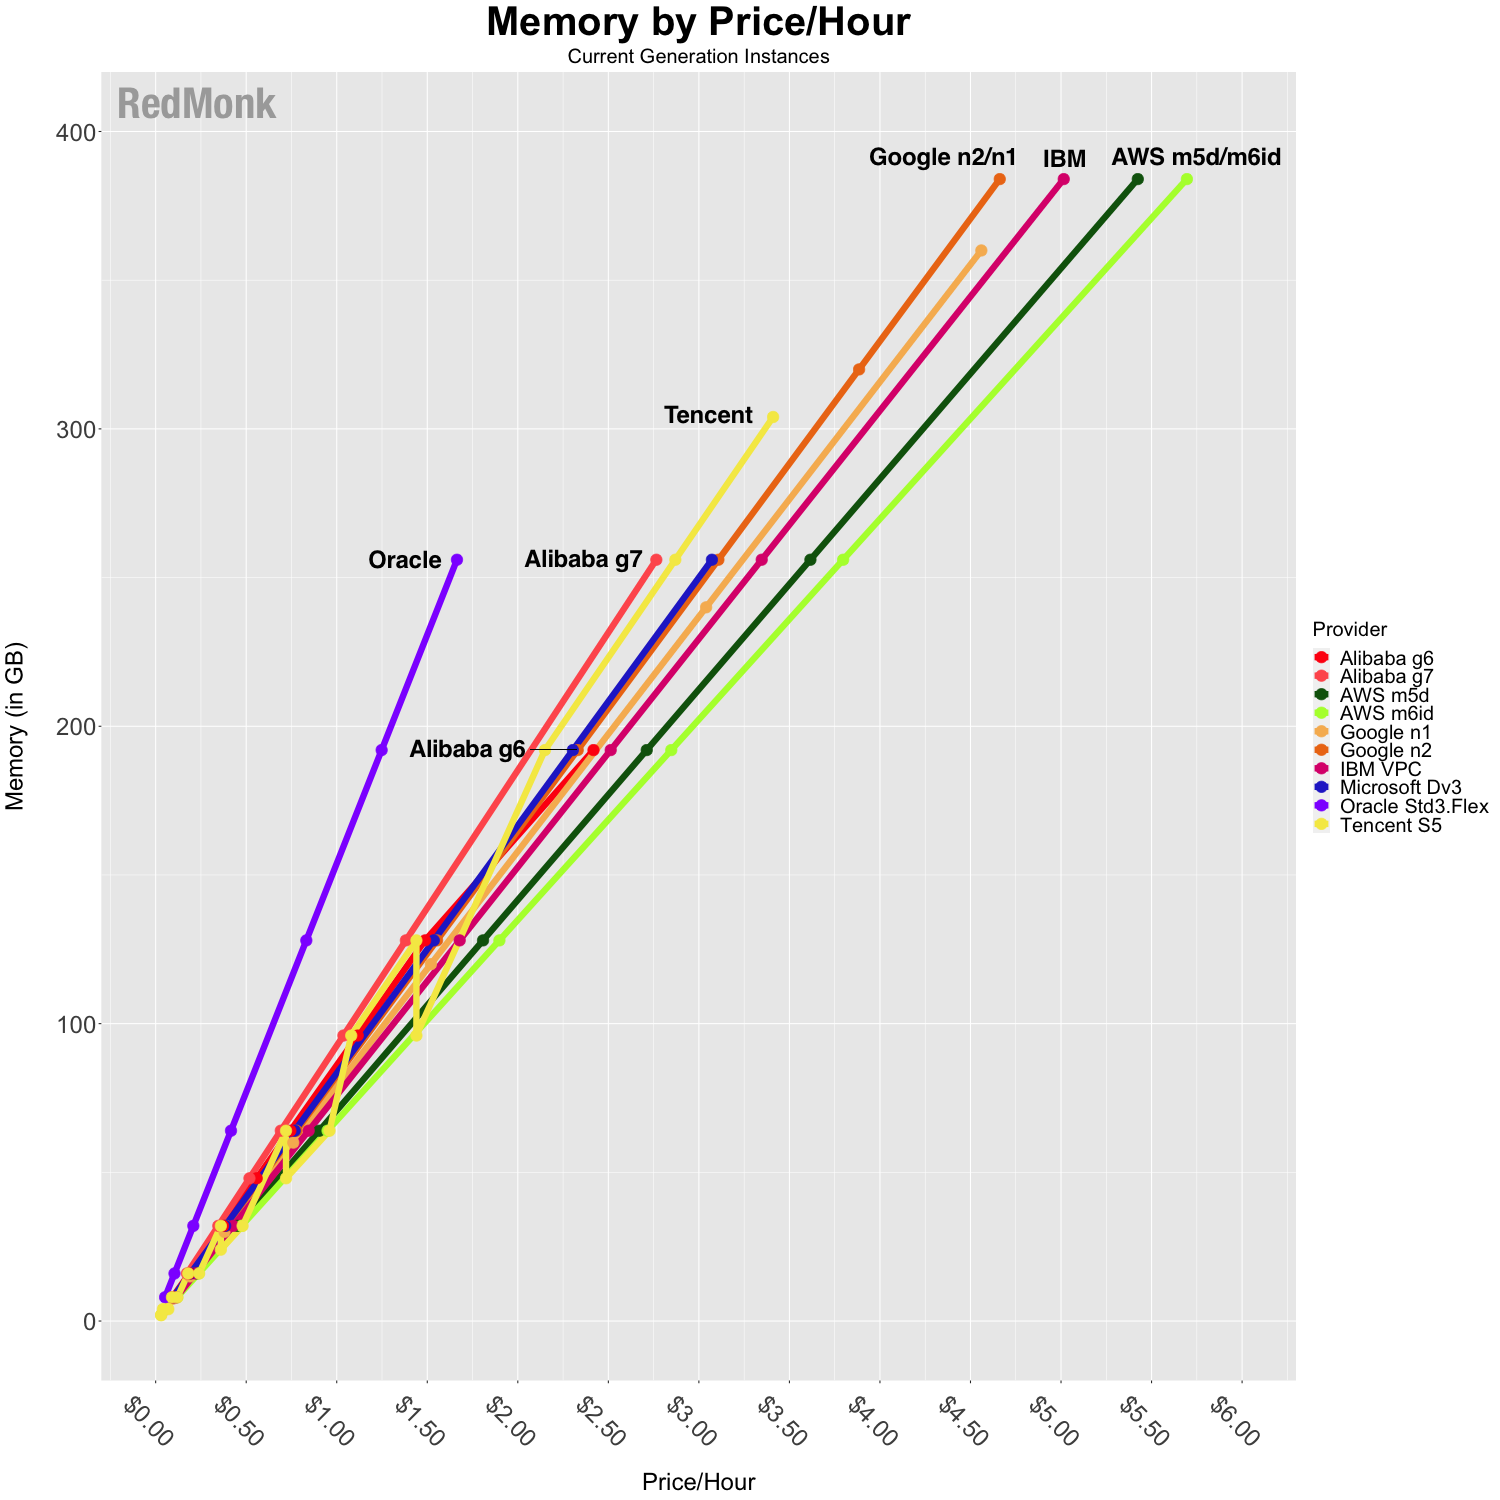 Comparison of IaaS Memory Pricing, current instance generations. X-Axis is price/hour, Y-Axis is GB of Memory